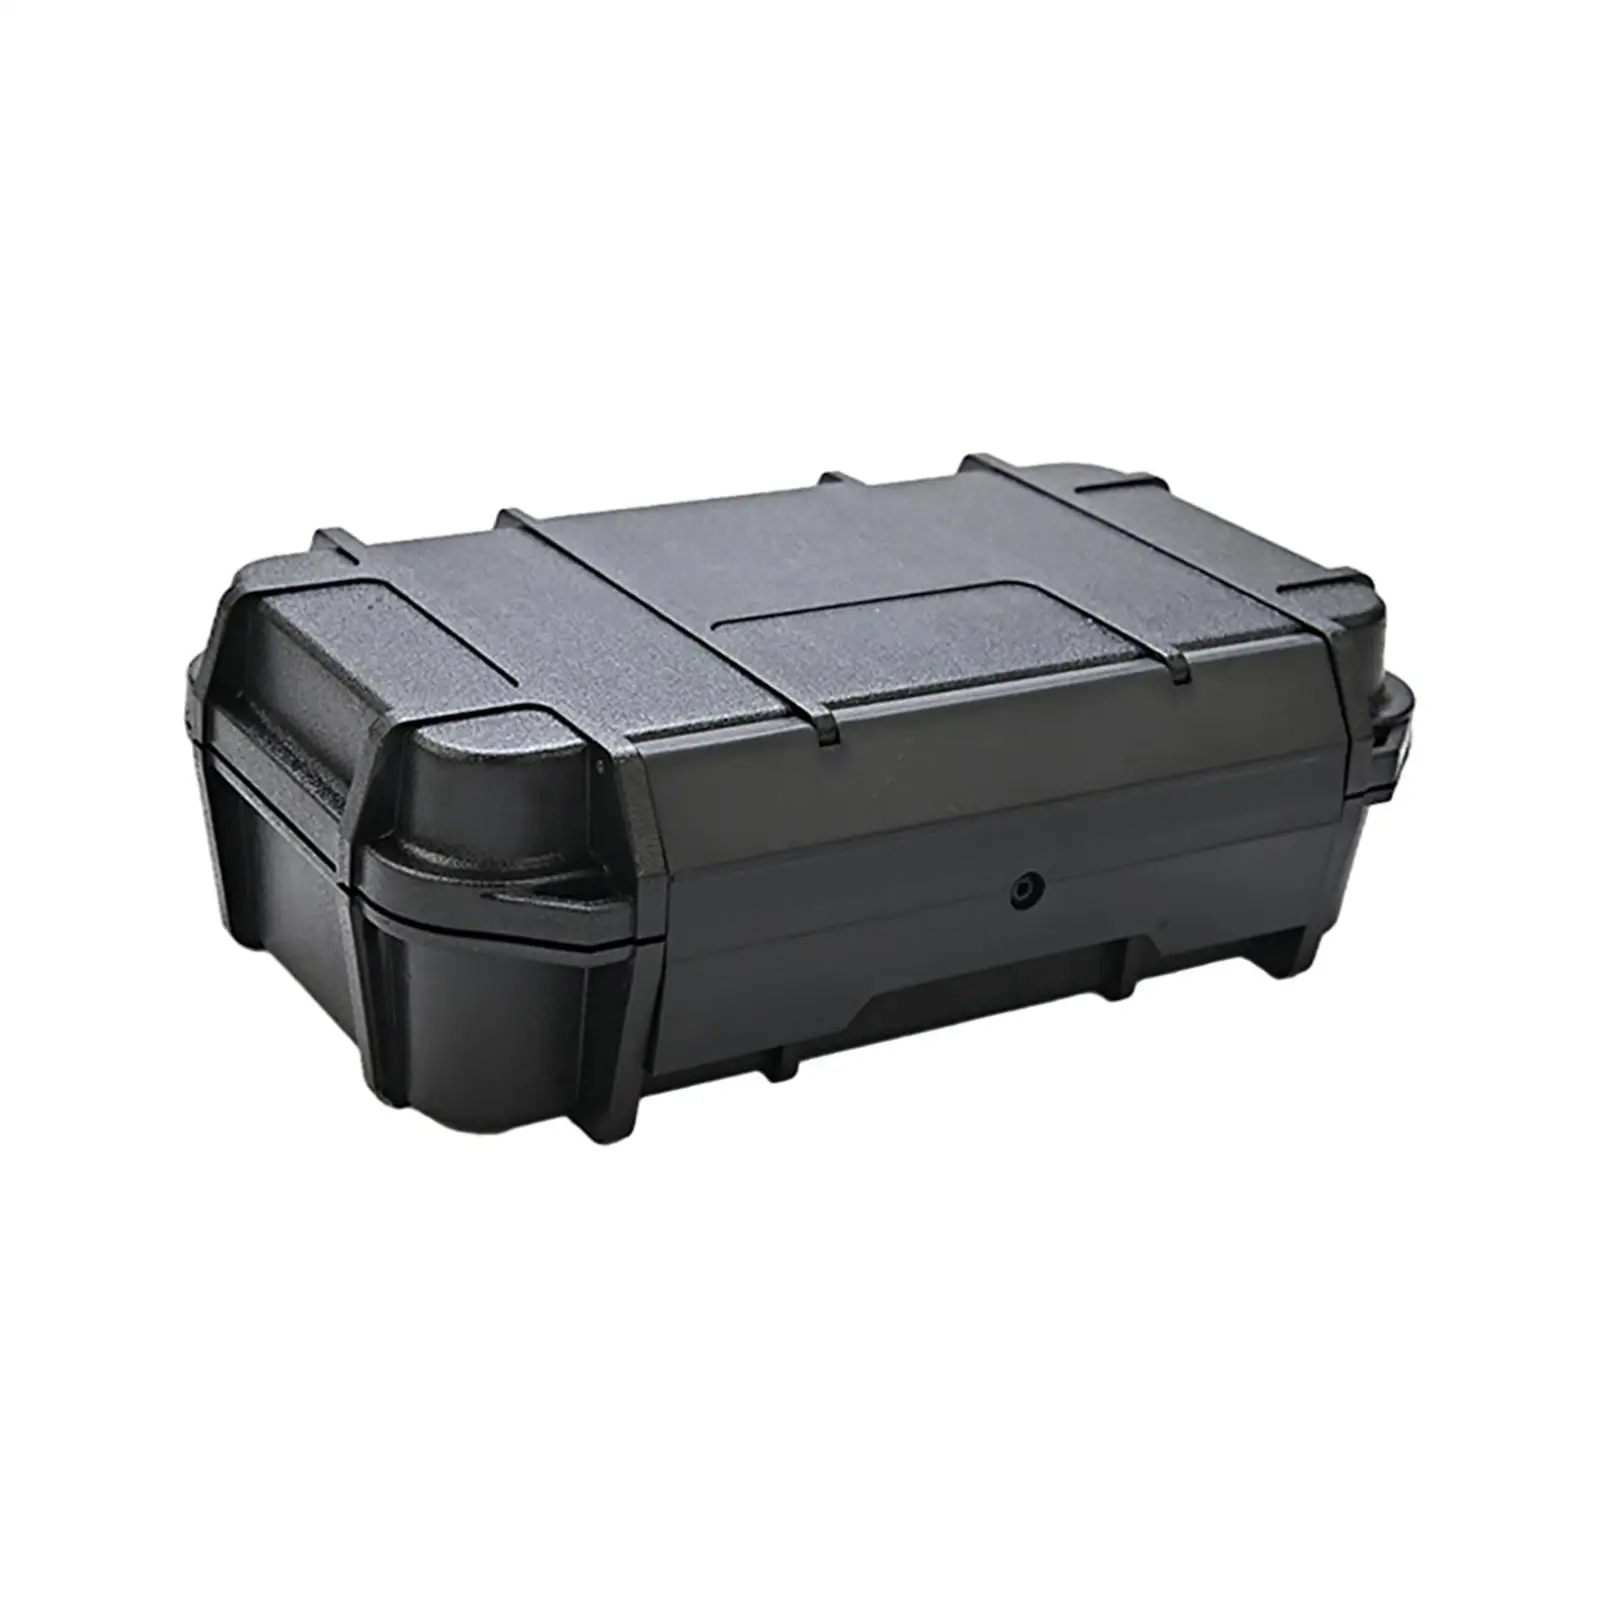 Tool Case Multipurpose Waterproof Storage Container for Small Electronics Equipment Tools Repair Tool Accessories Tools Parts